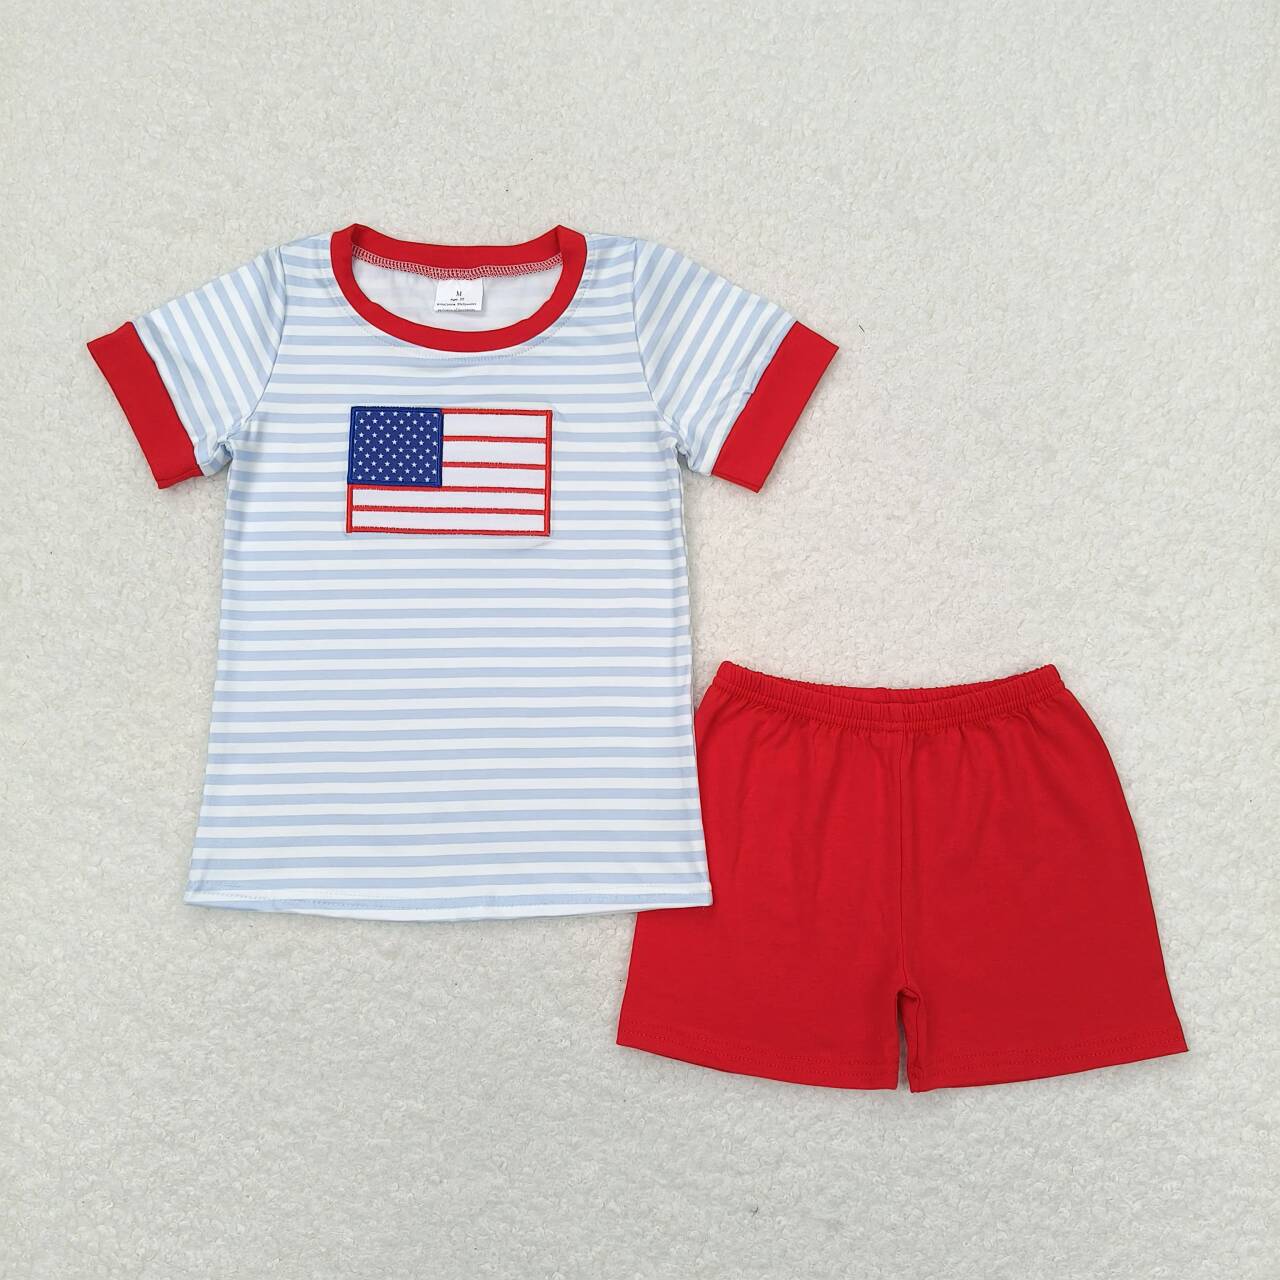 USA flag embroidery boy red shorts set patriotic clothing